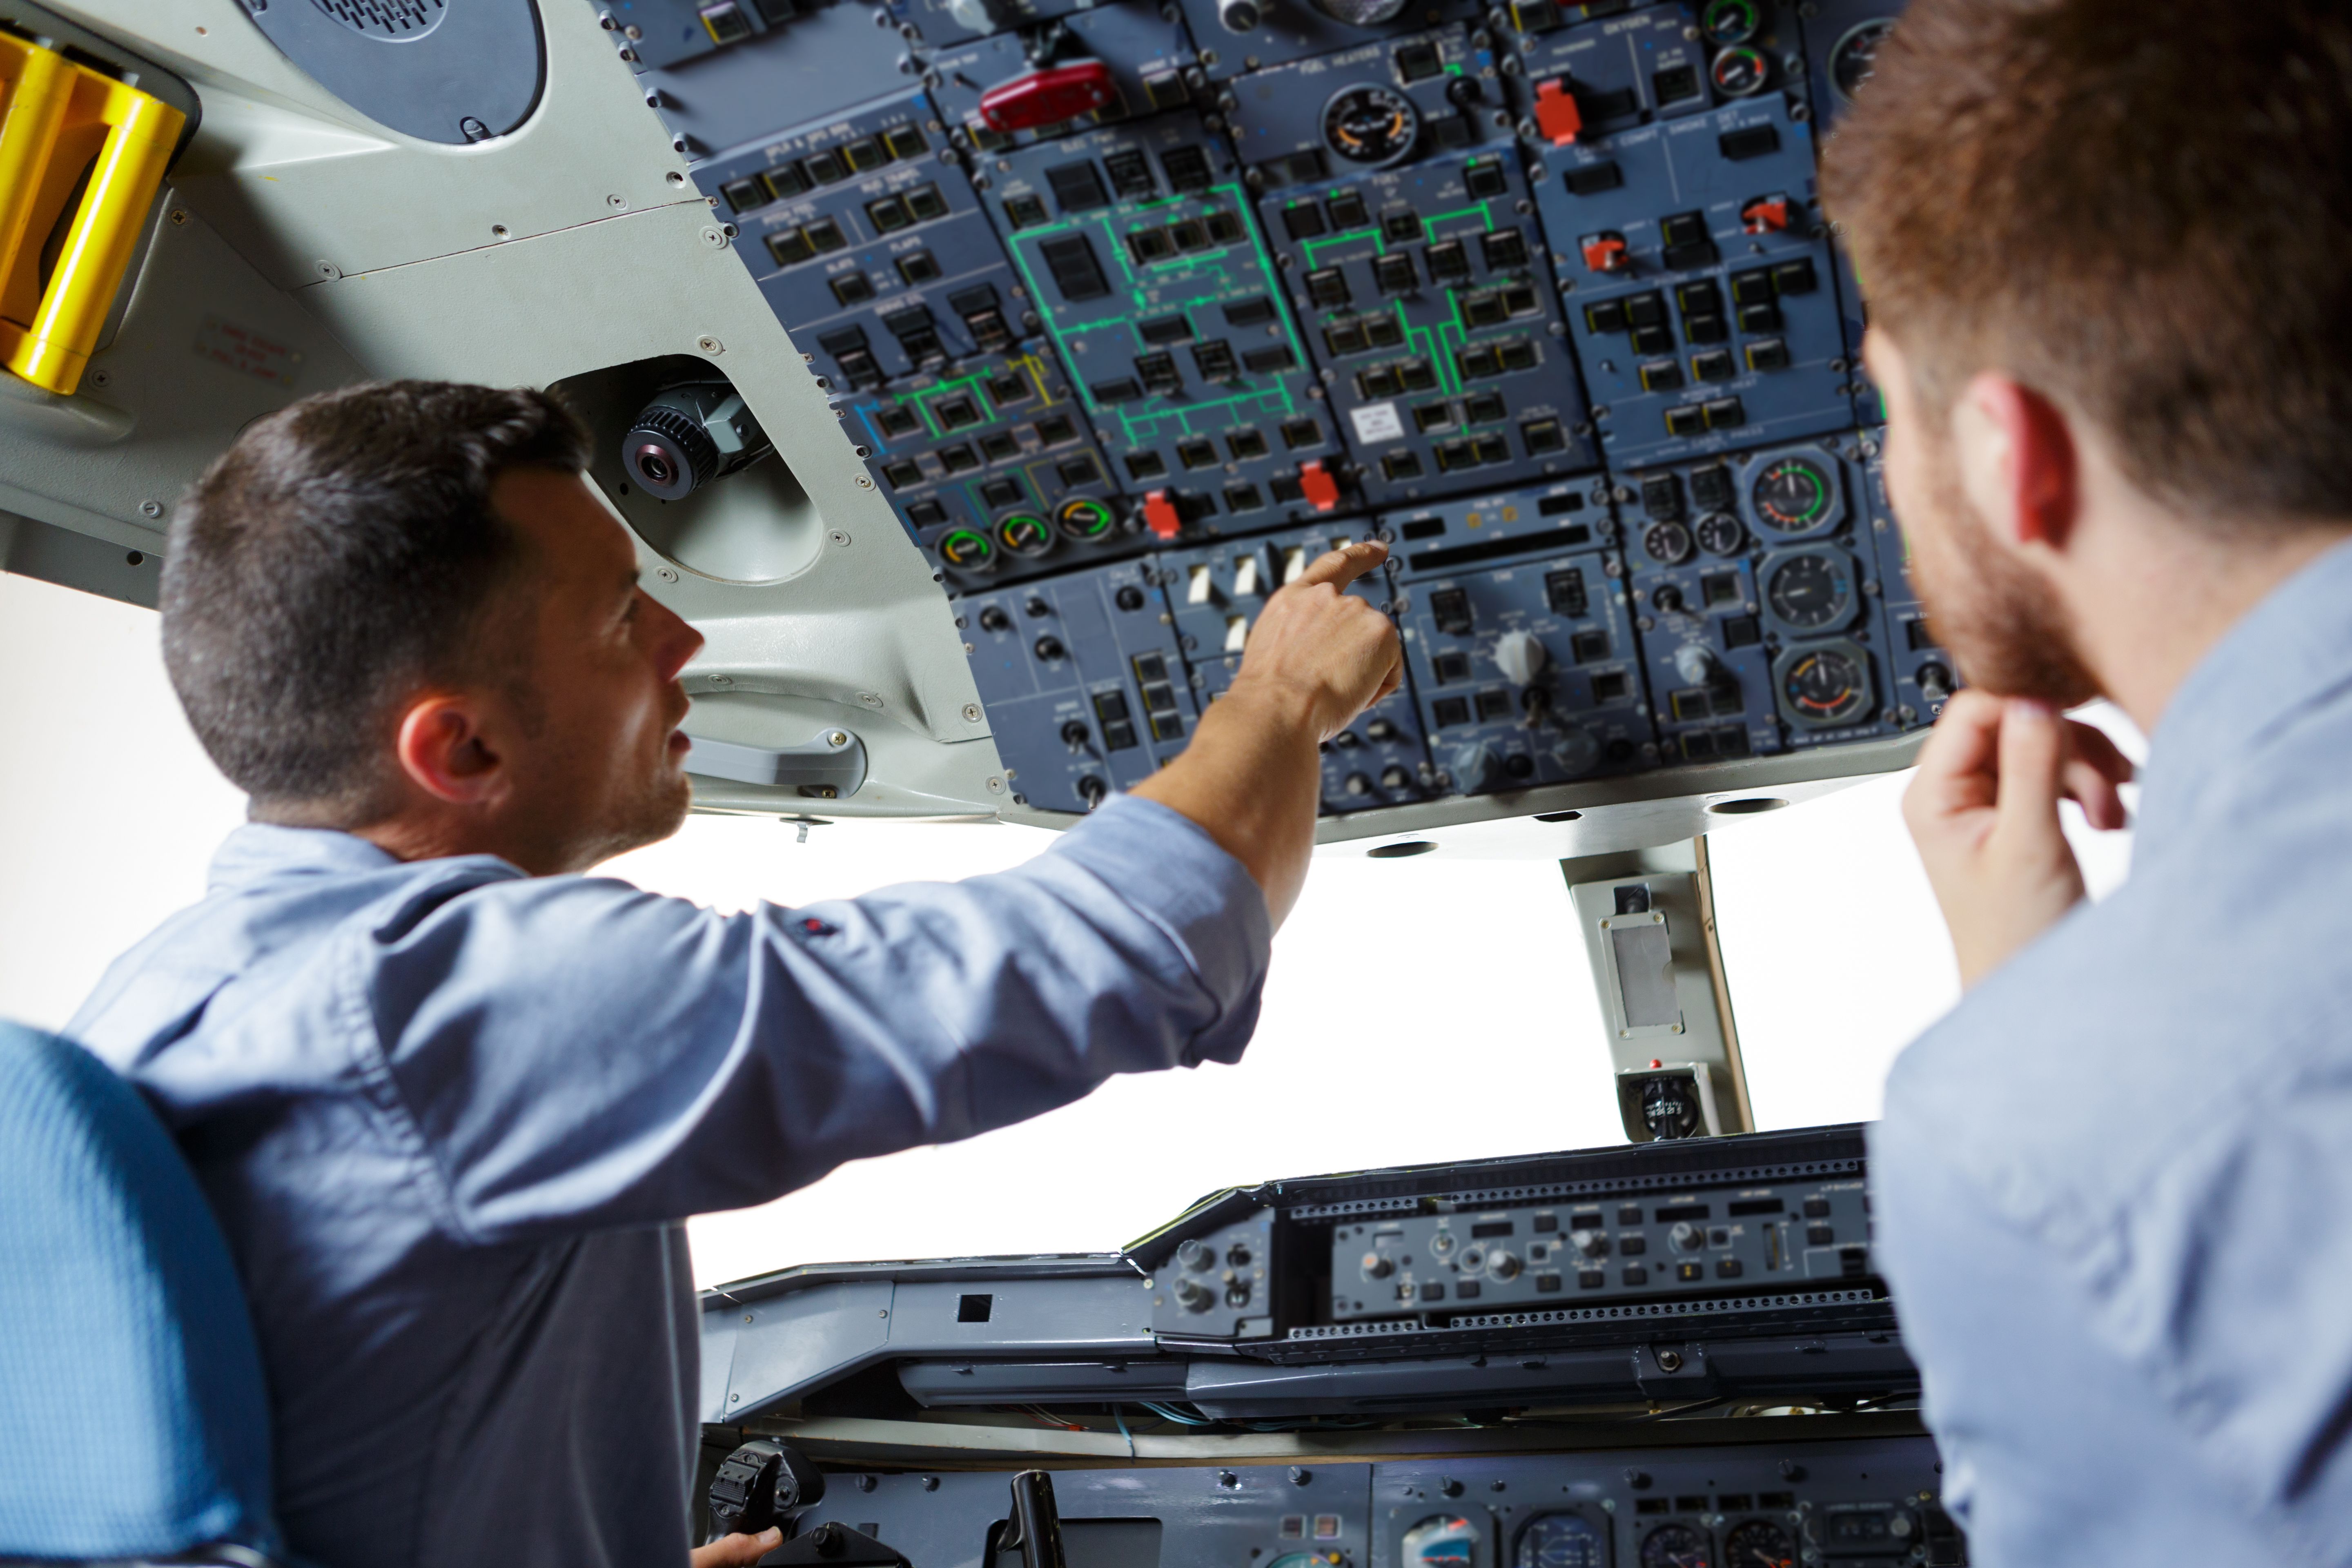 Two pilots inspecting buttons on the overhead panel of an aircraft cockpit.